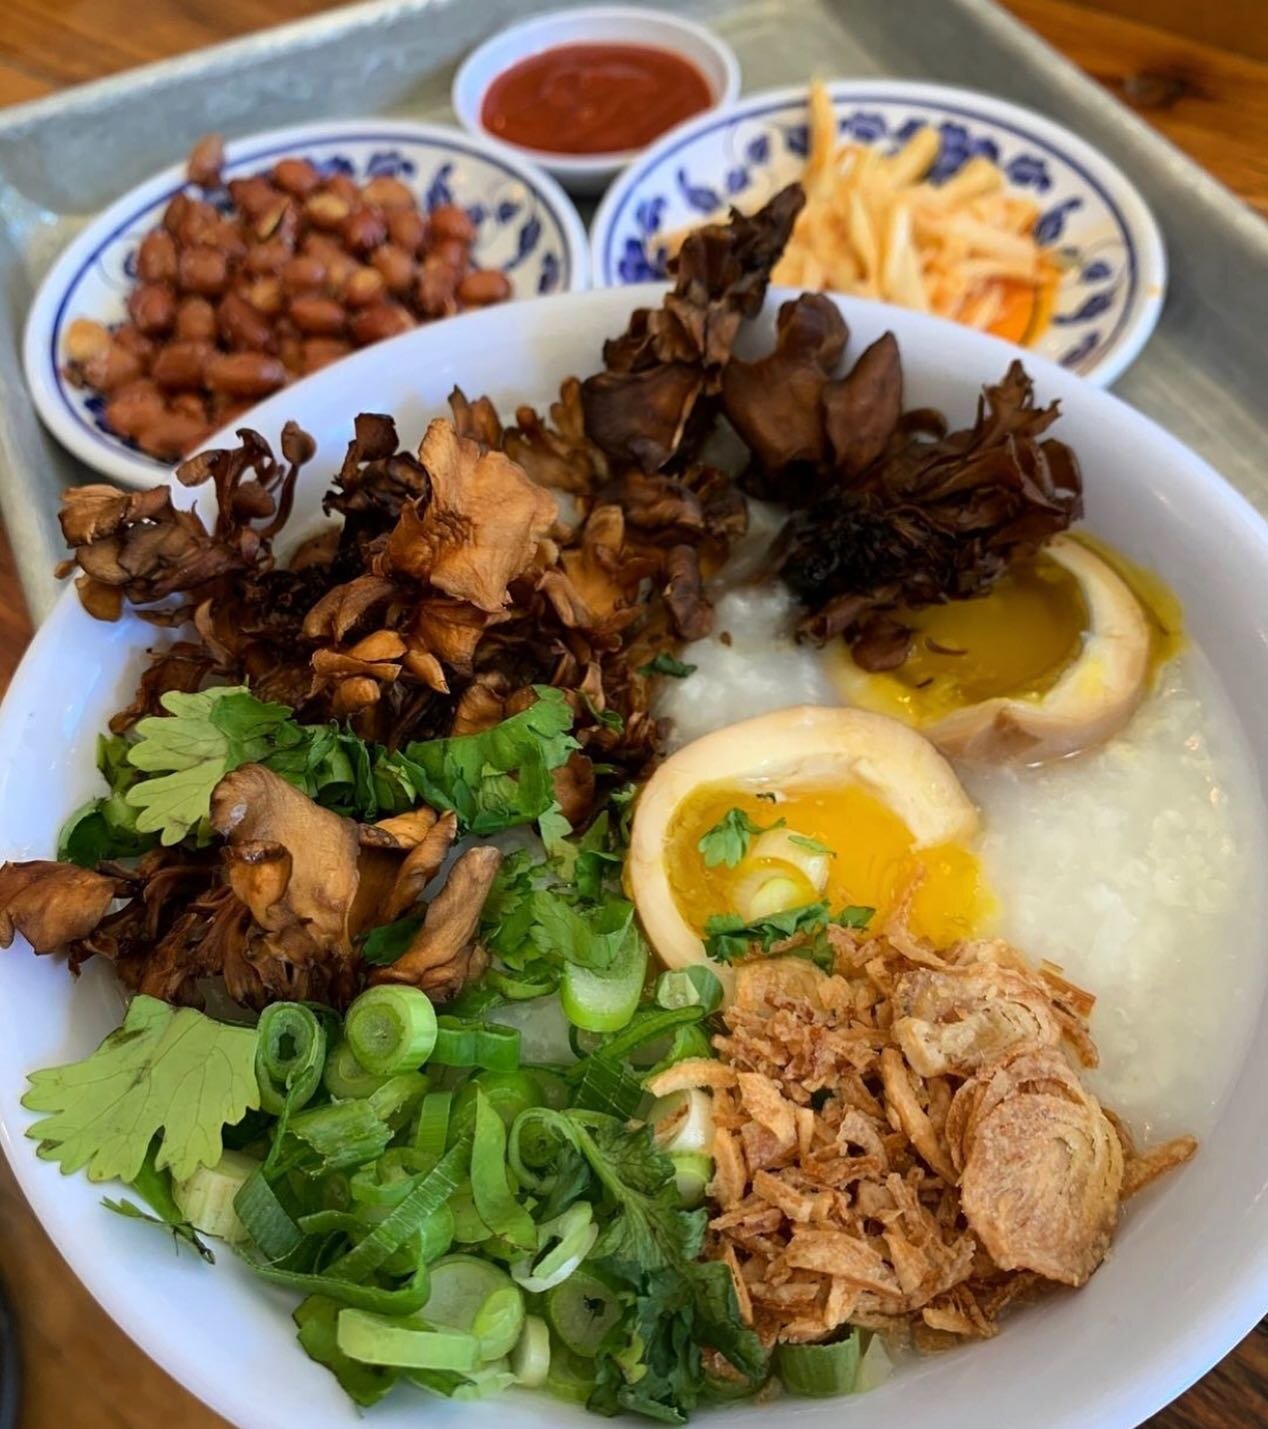 Who&rsquo;s hungry for some congee?? Take home kits available this weekend @meimeiboston ! Pick up today - Saturday, everything is fully cooked, just heat and eat! Choice of chicken or tofu 🍲🥢

Order now from link 👆🏼